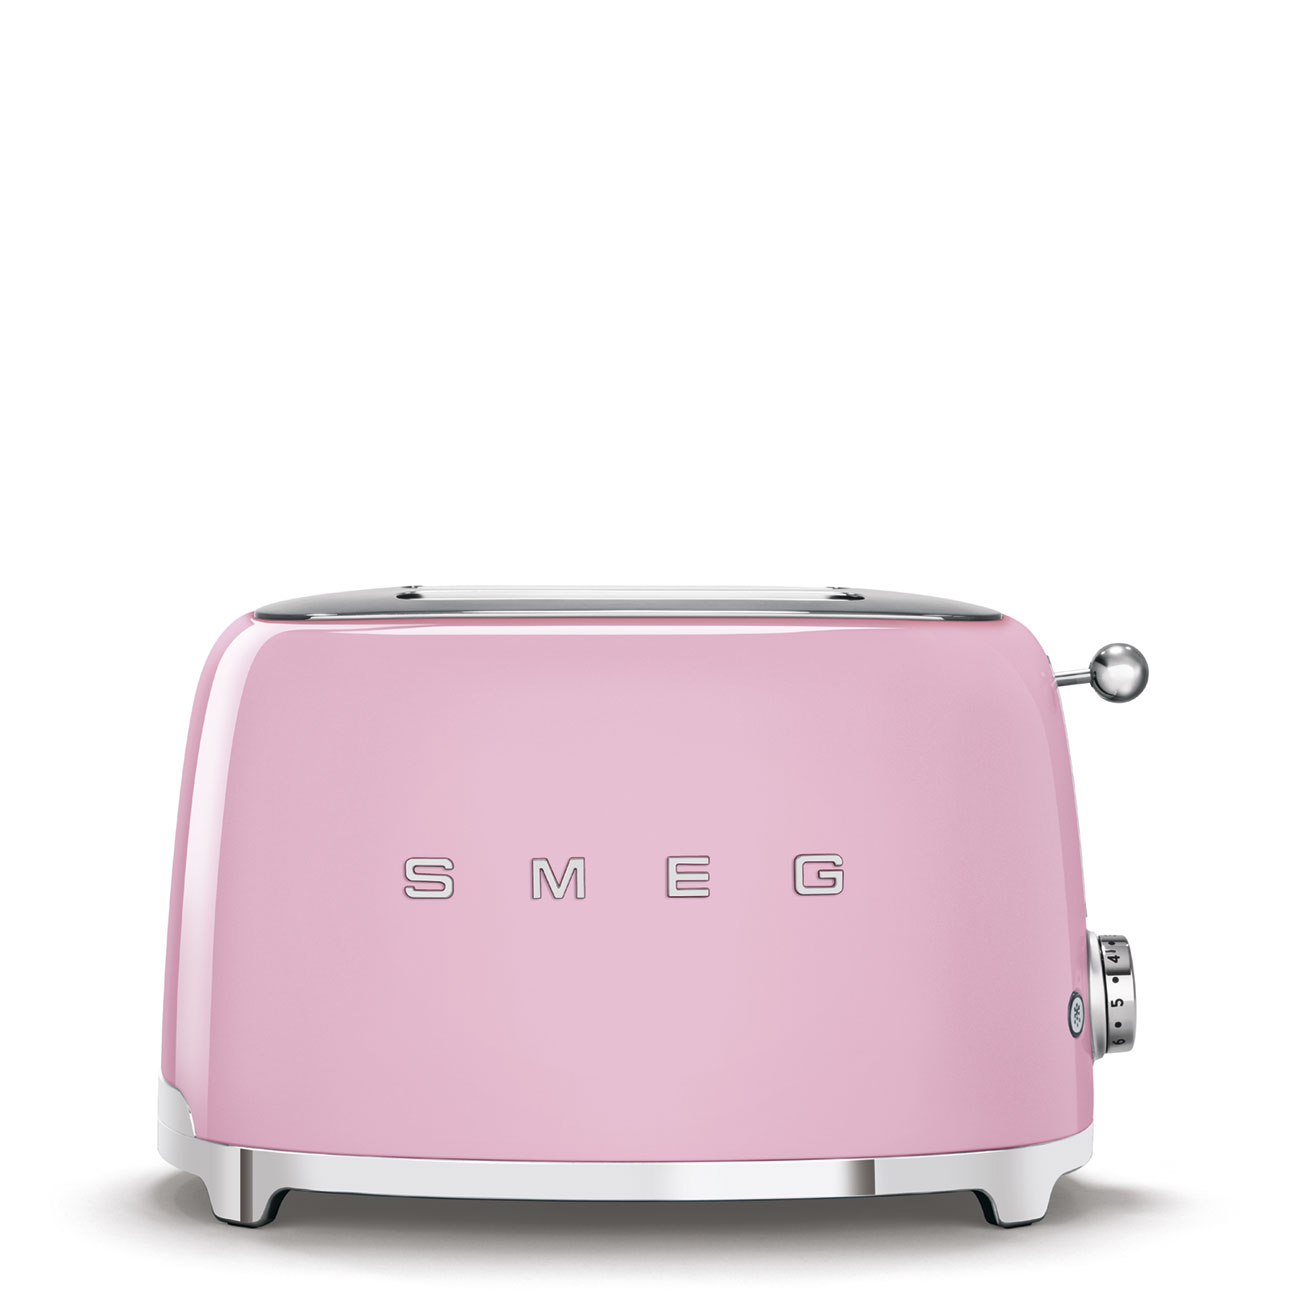 Pink 2x1 Toaster - 4365